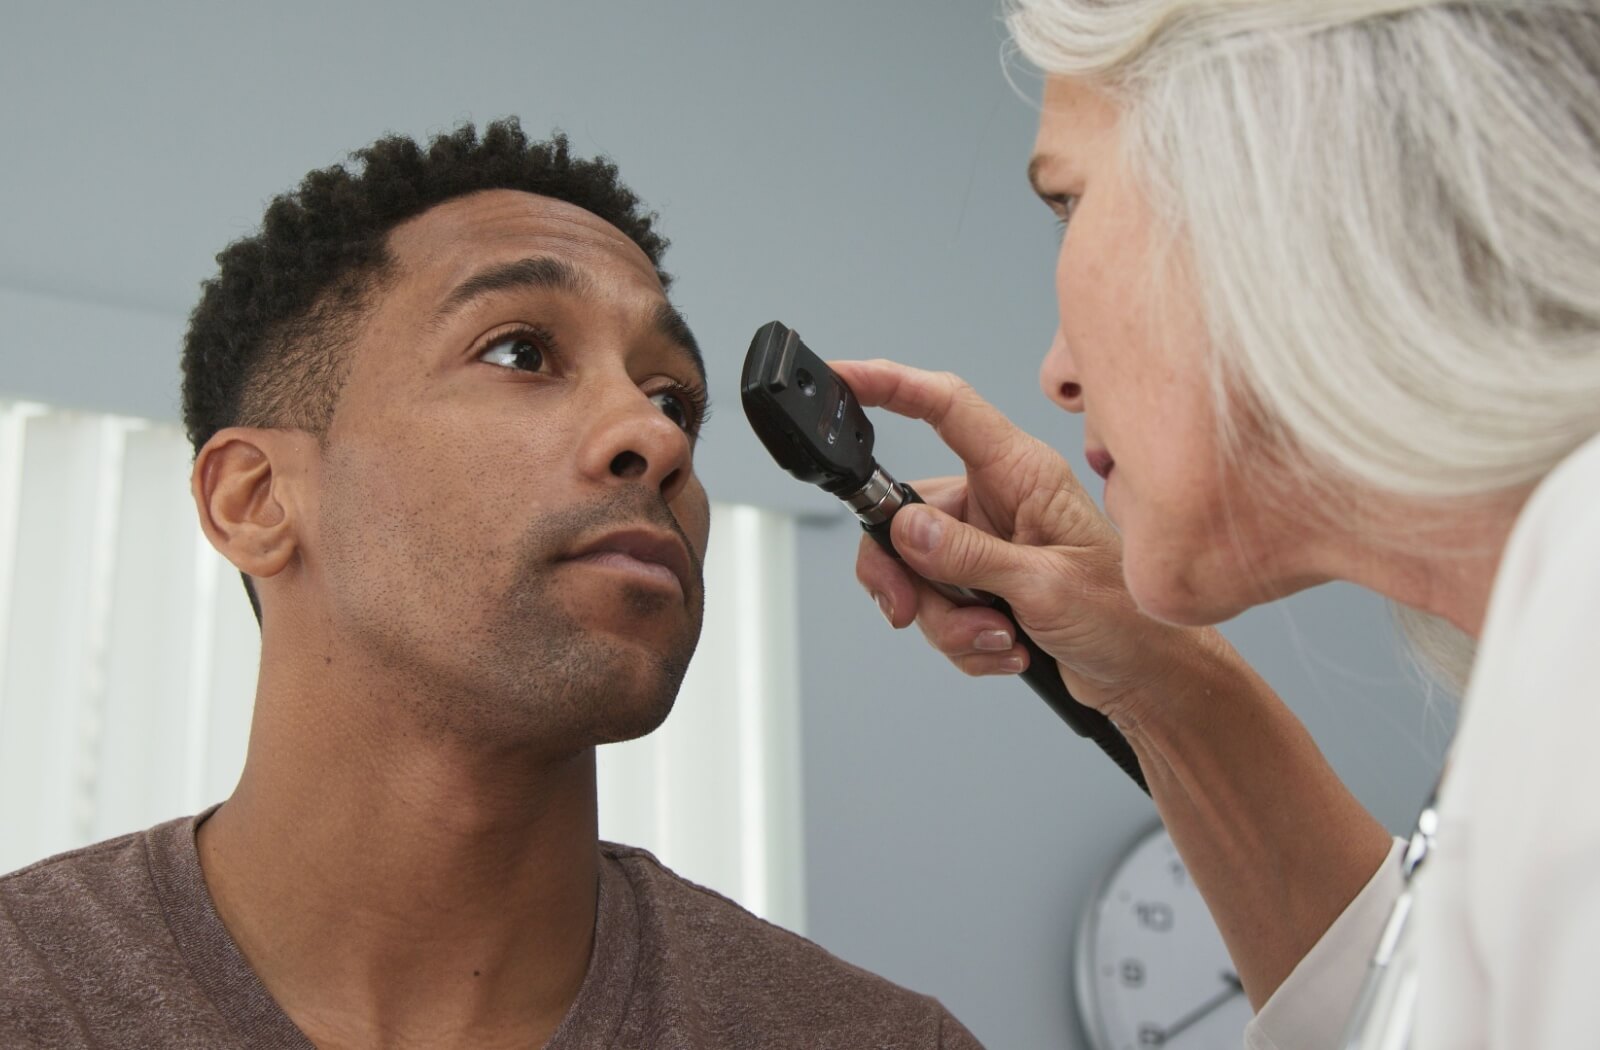 A male patient has his eyes checked by an optometrist as part of an eye exam.